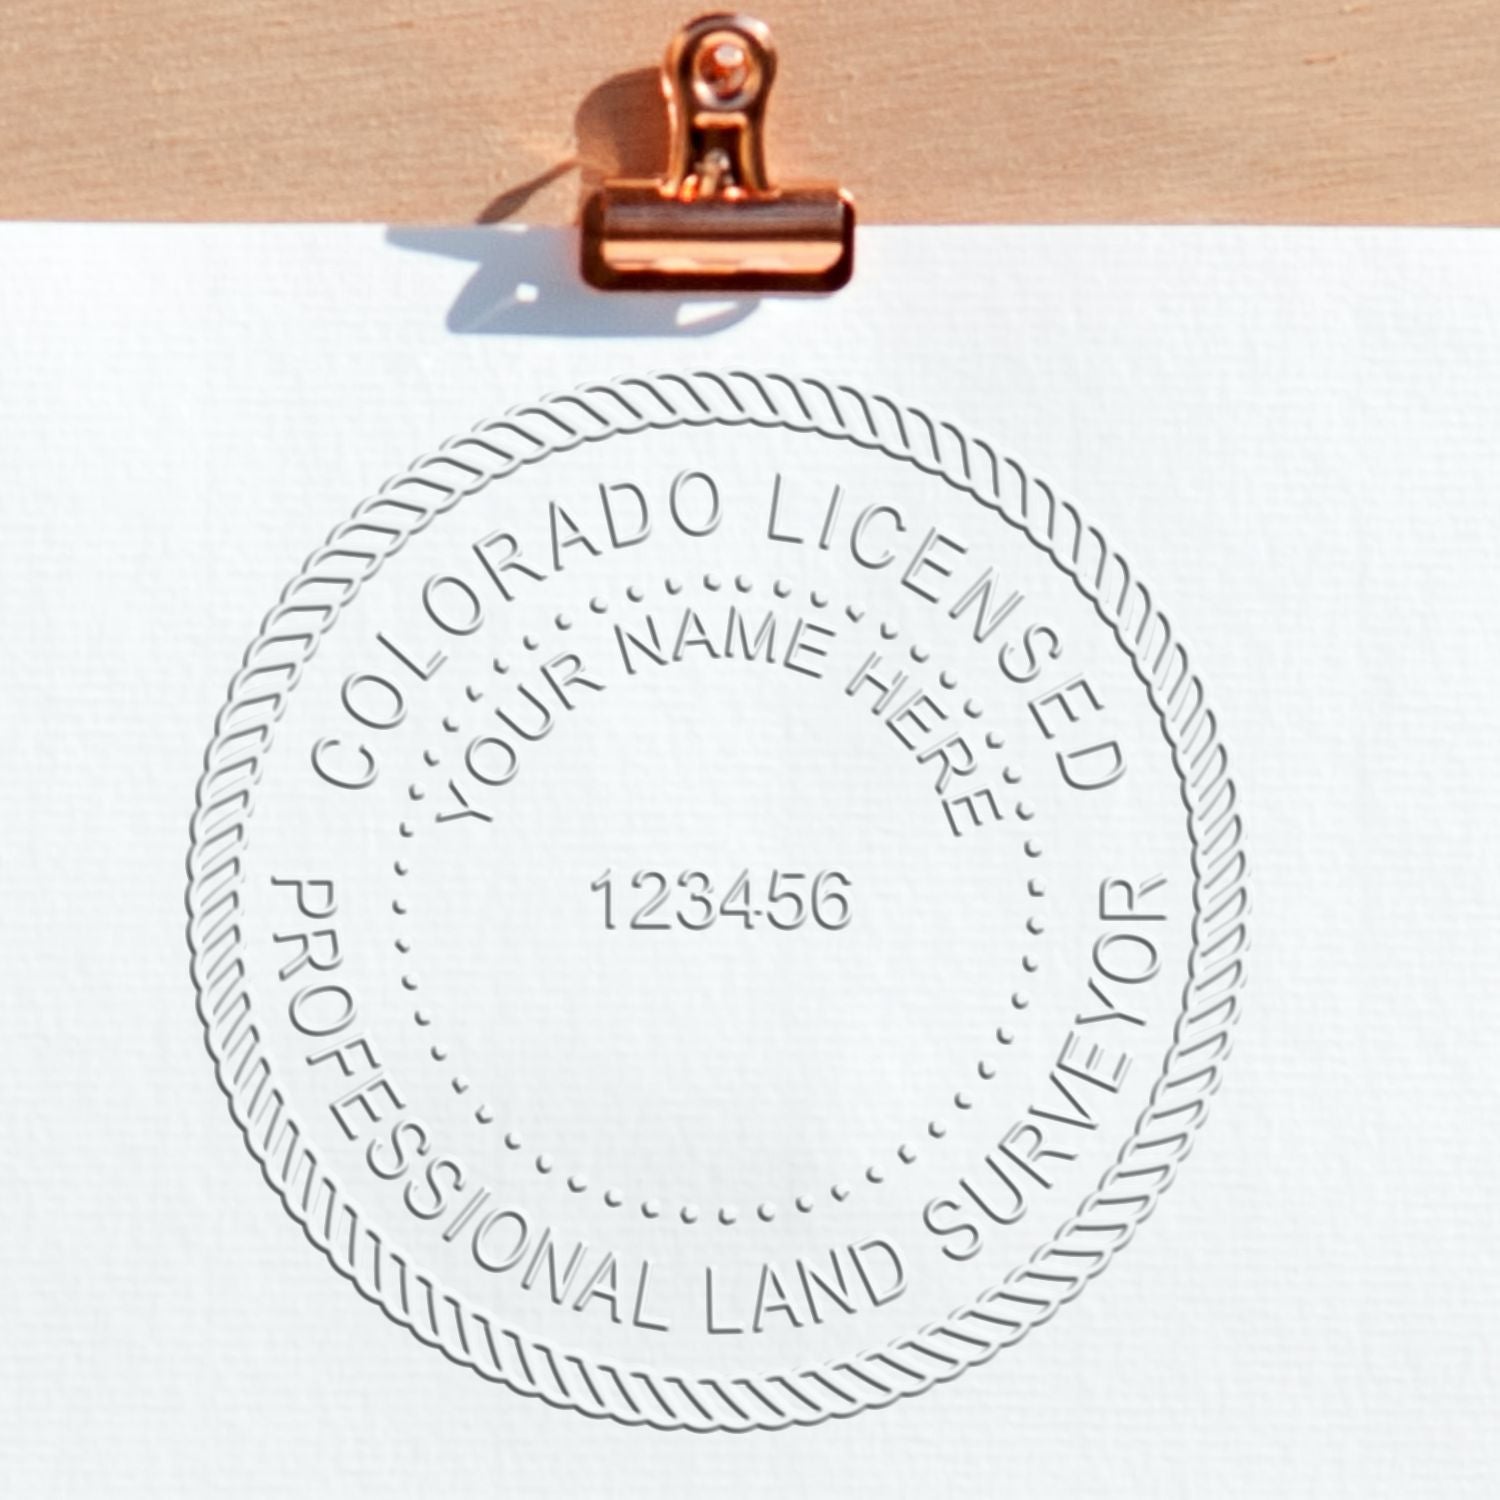 The main image for the Handheld Colorado Land Surveyor Seal depicting a sample of the imprint and electronic files